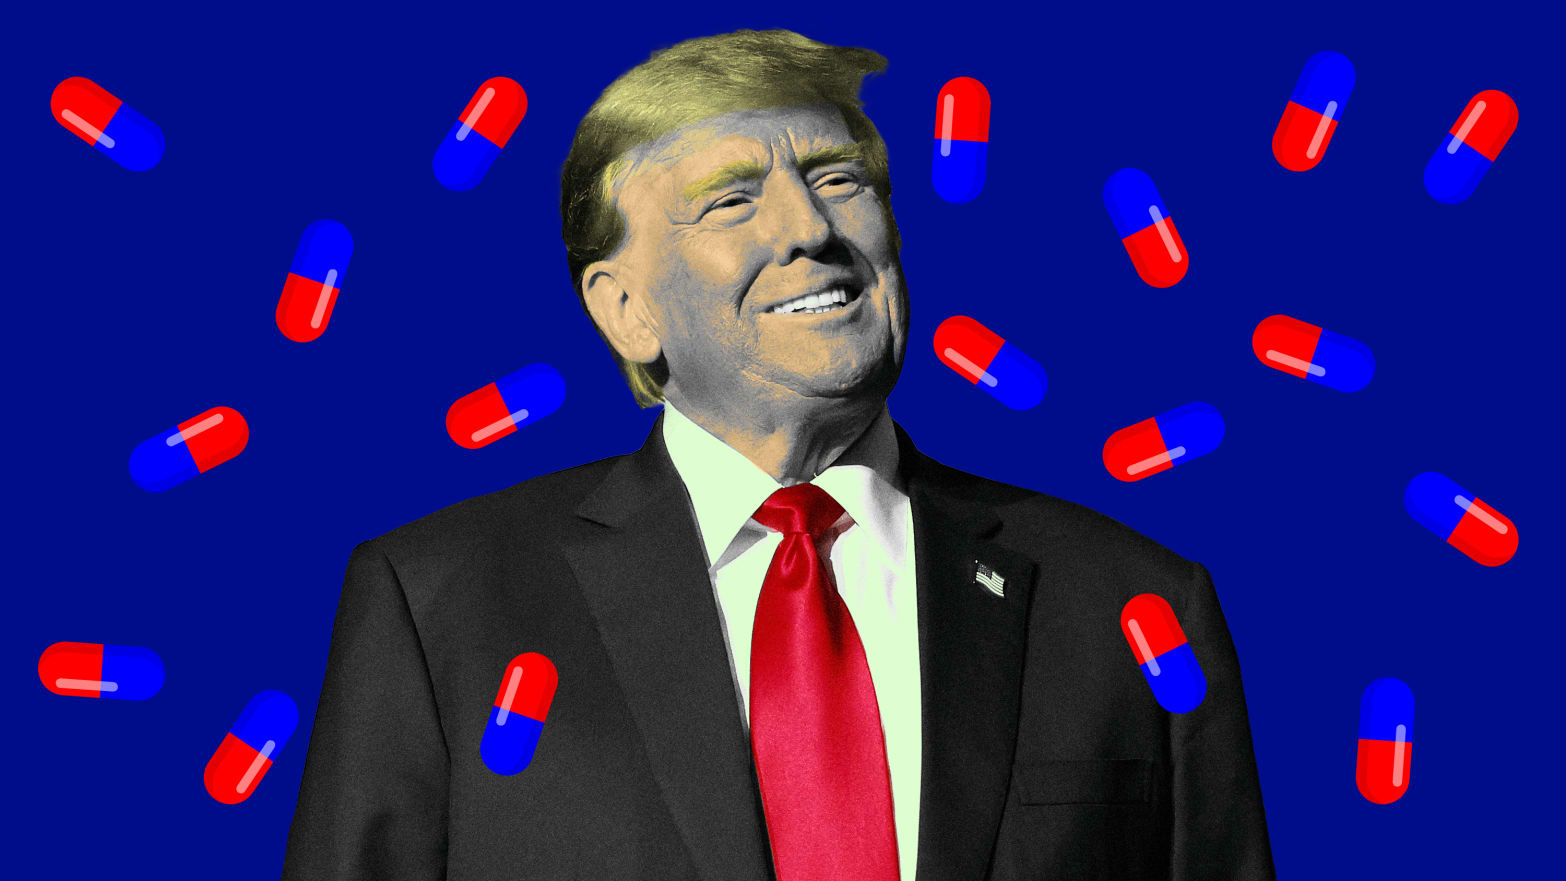 A photo illustration of Donald Trump and red and blue pills.